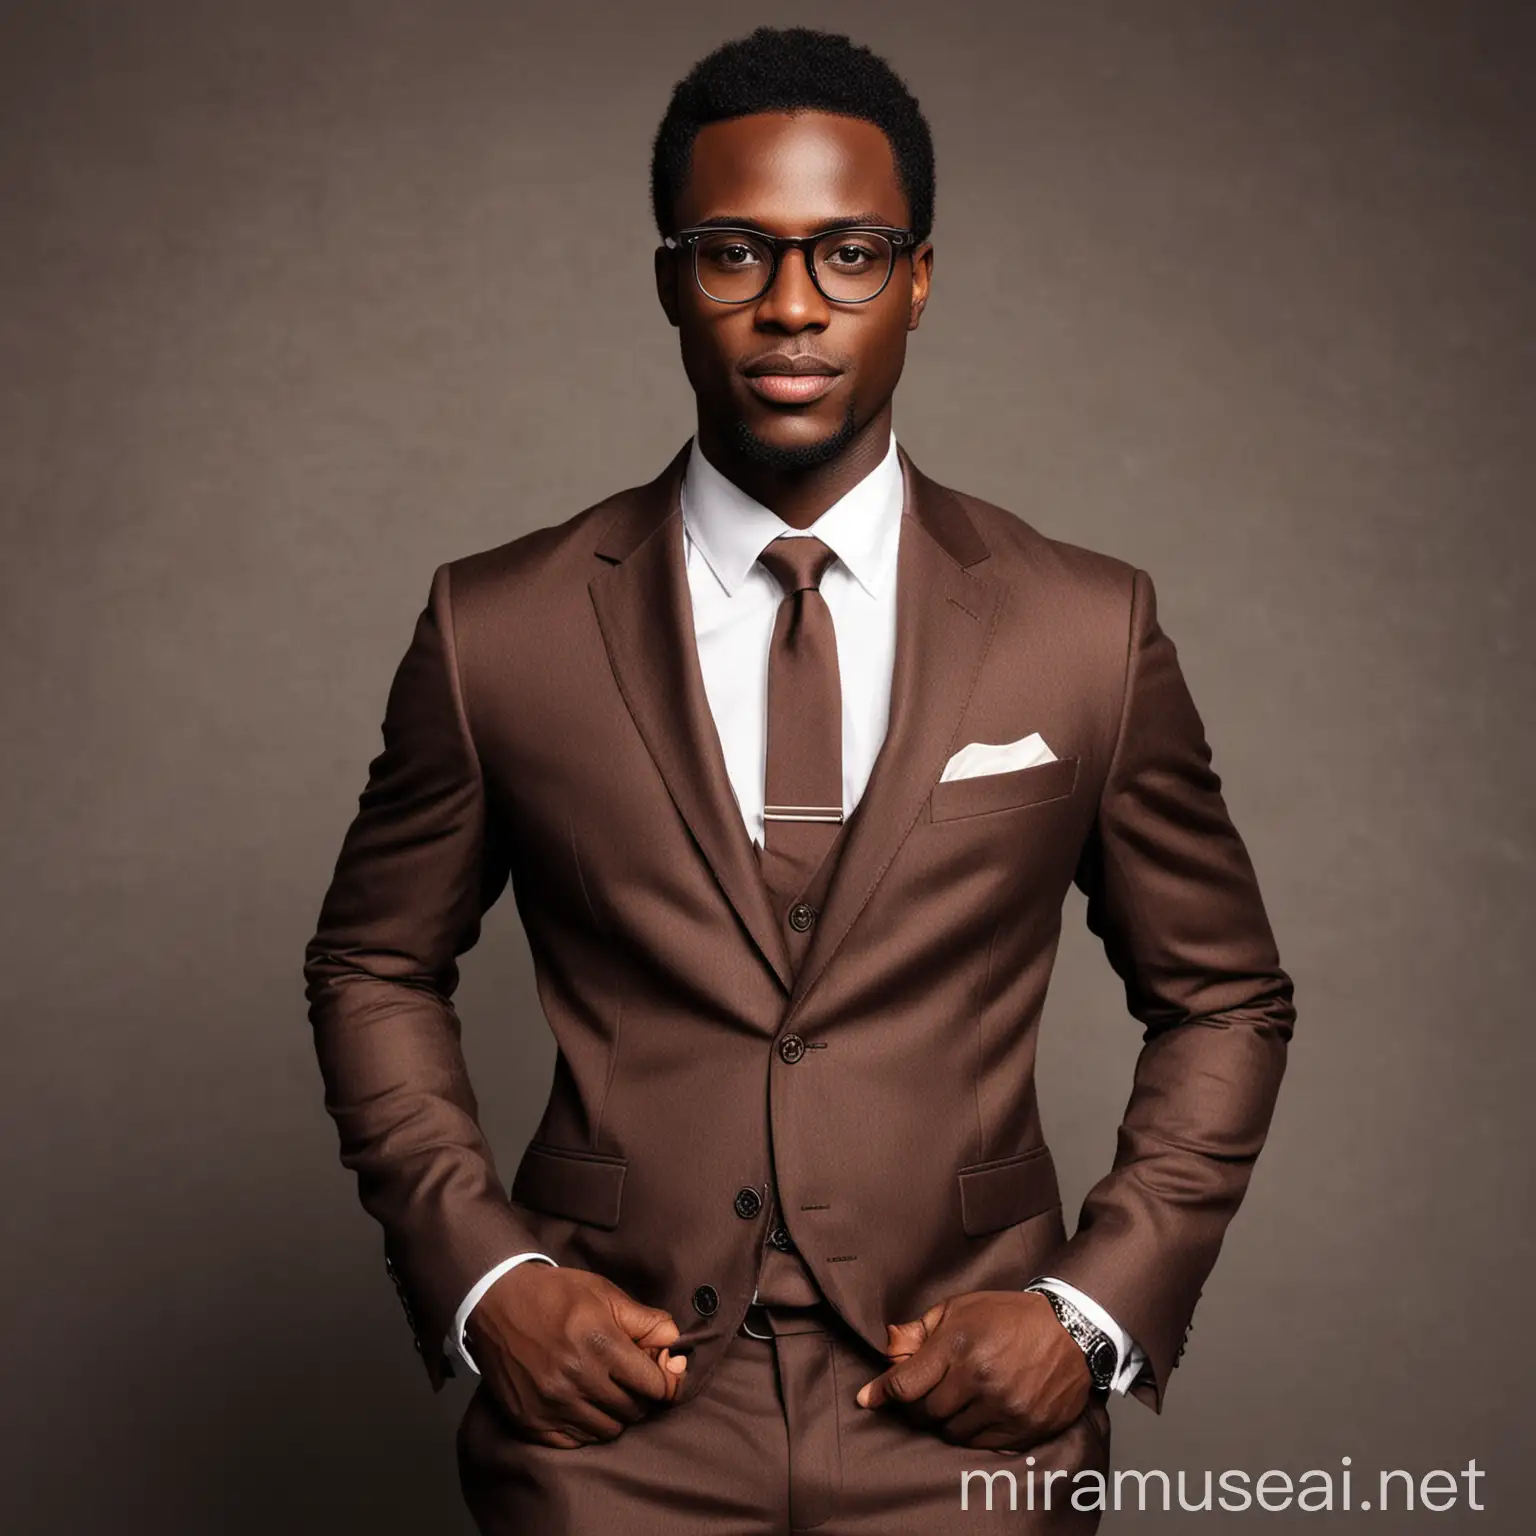 i need a professional picture of an handsome chocolate color man with beautiful suit. also using glasses 